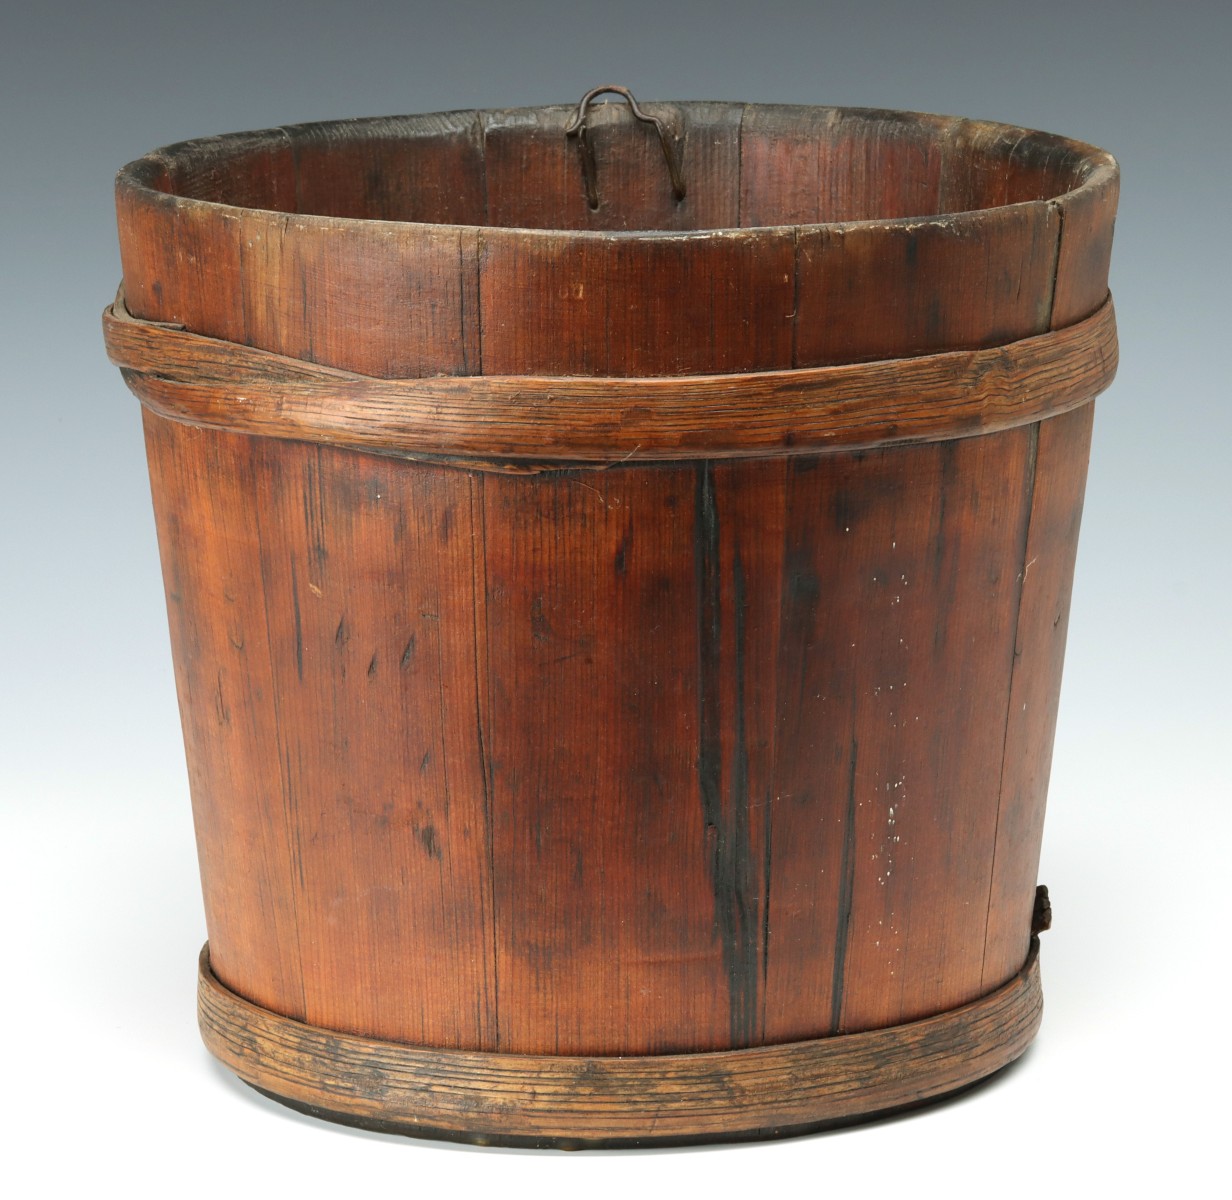 A CEDAR STAVE CONTAINER WITH ASH WOOD BANDS